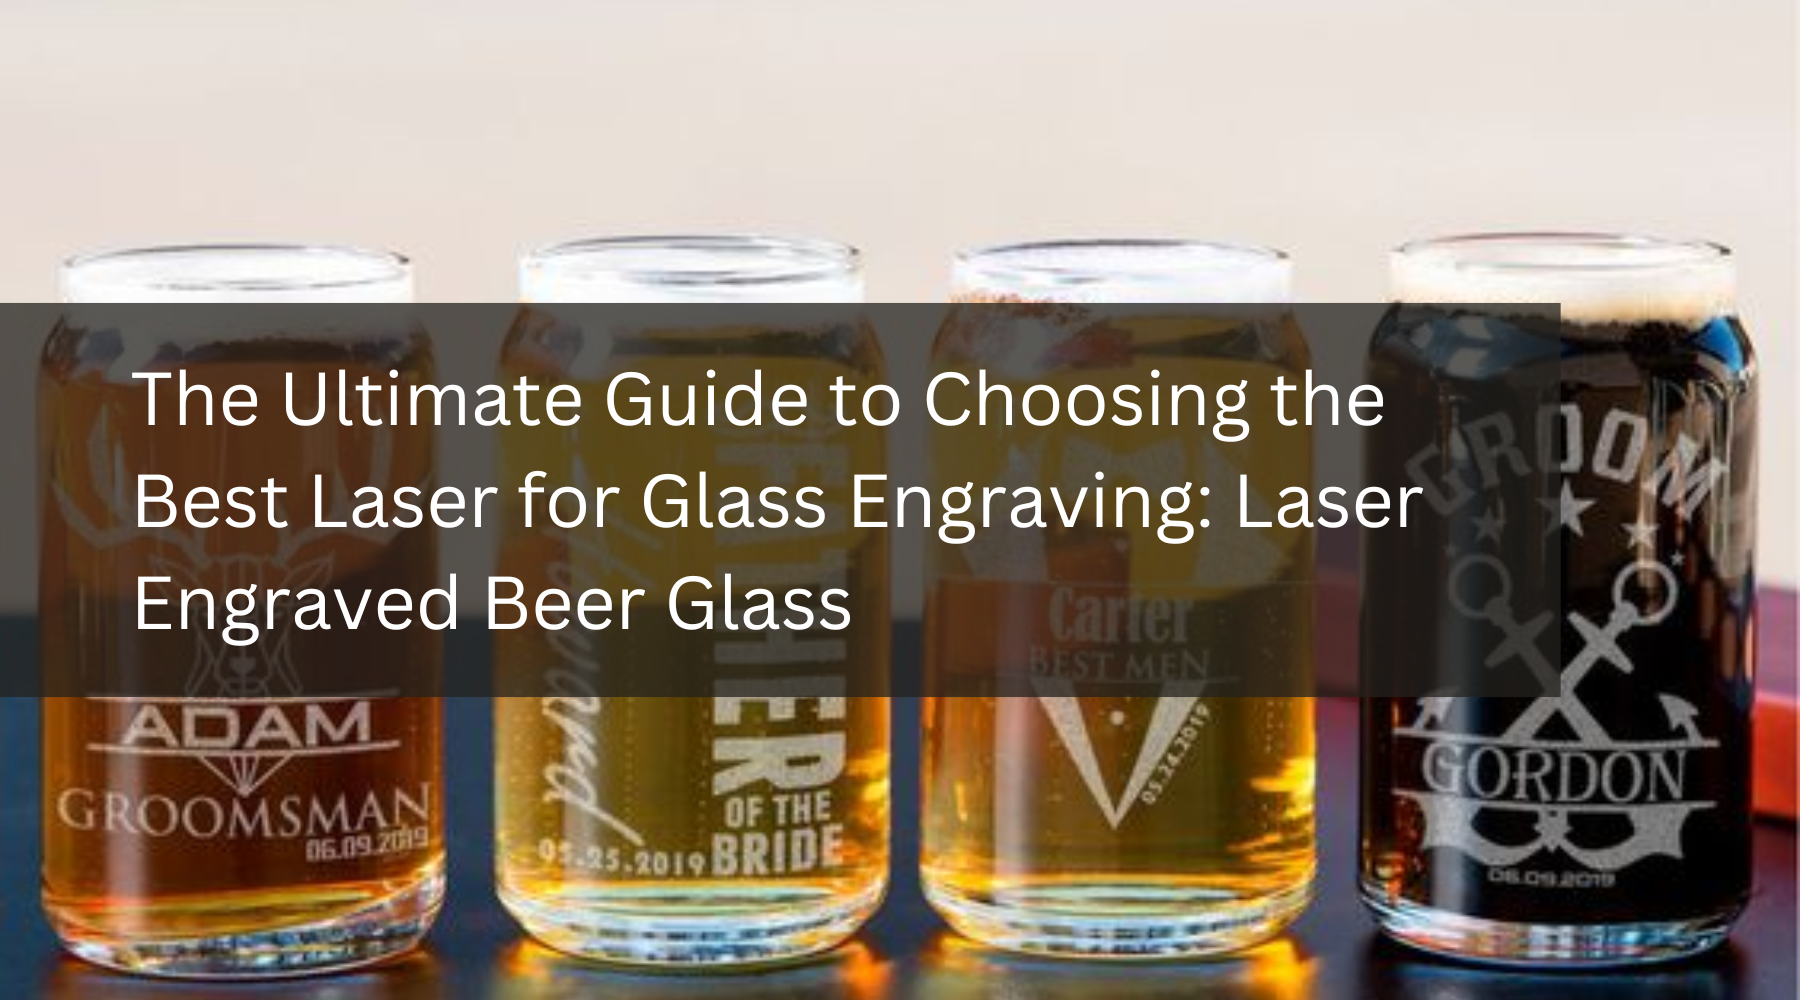 The Ultimate Guide to Choosing the Best Laser for Glass Engraving: Laser Engraved Beer Glass